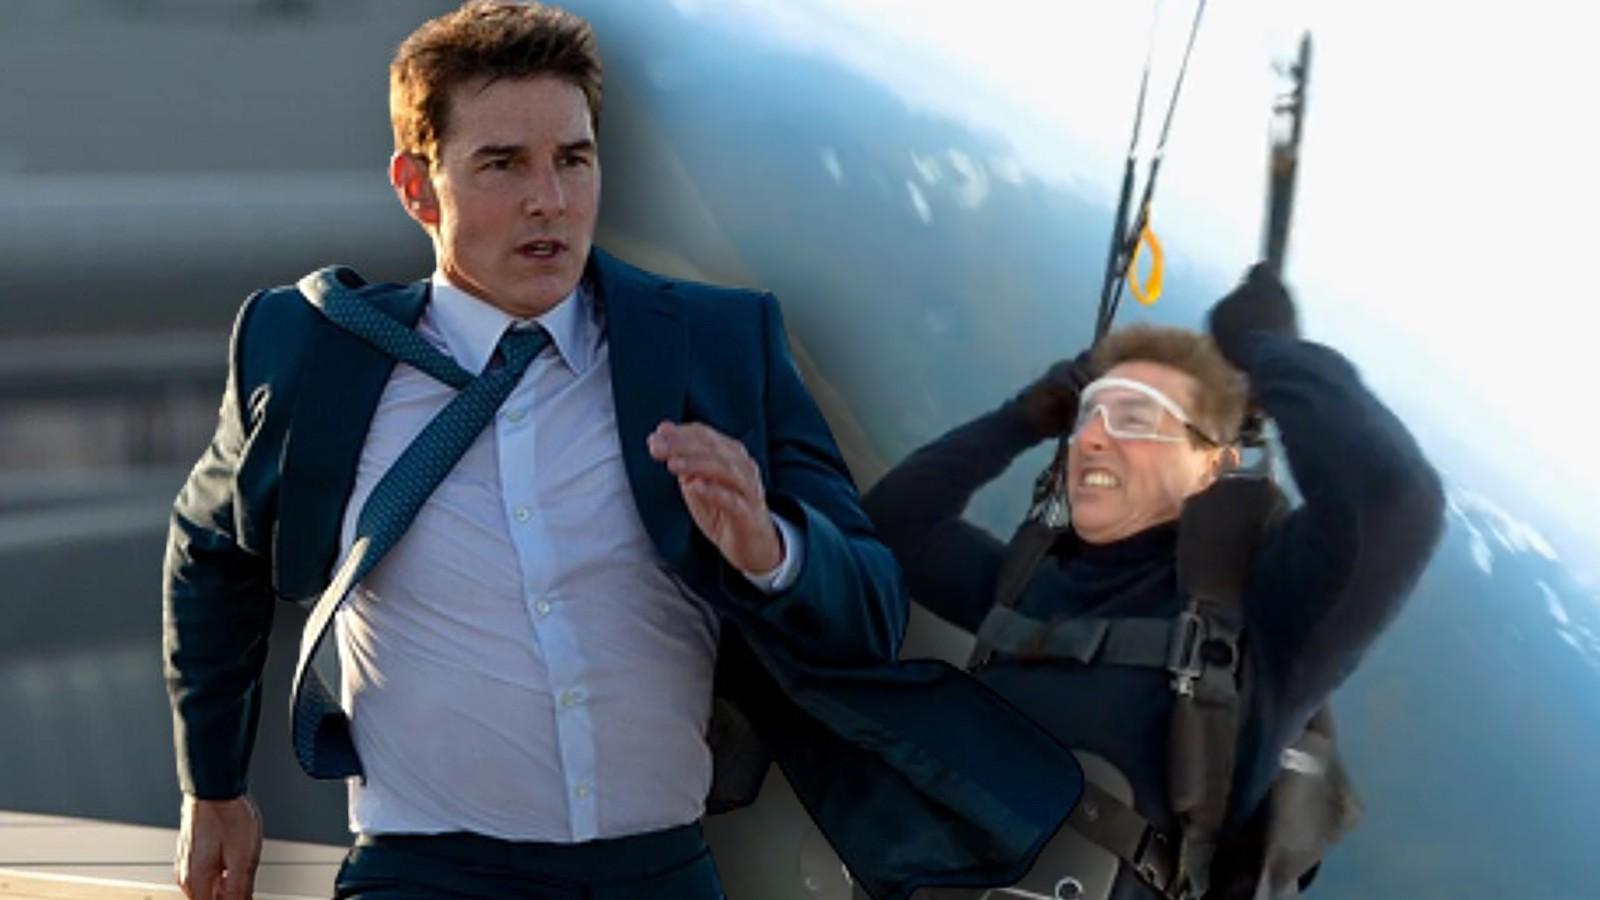 Tom Cruise in Mission: Impossible 7